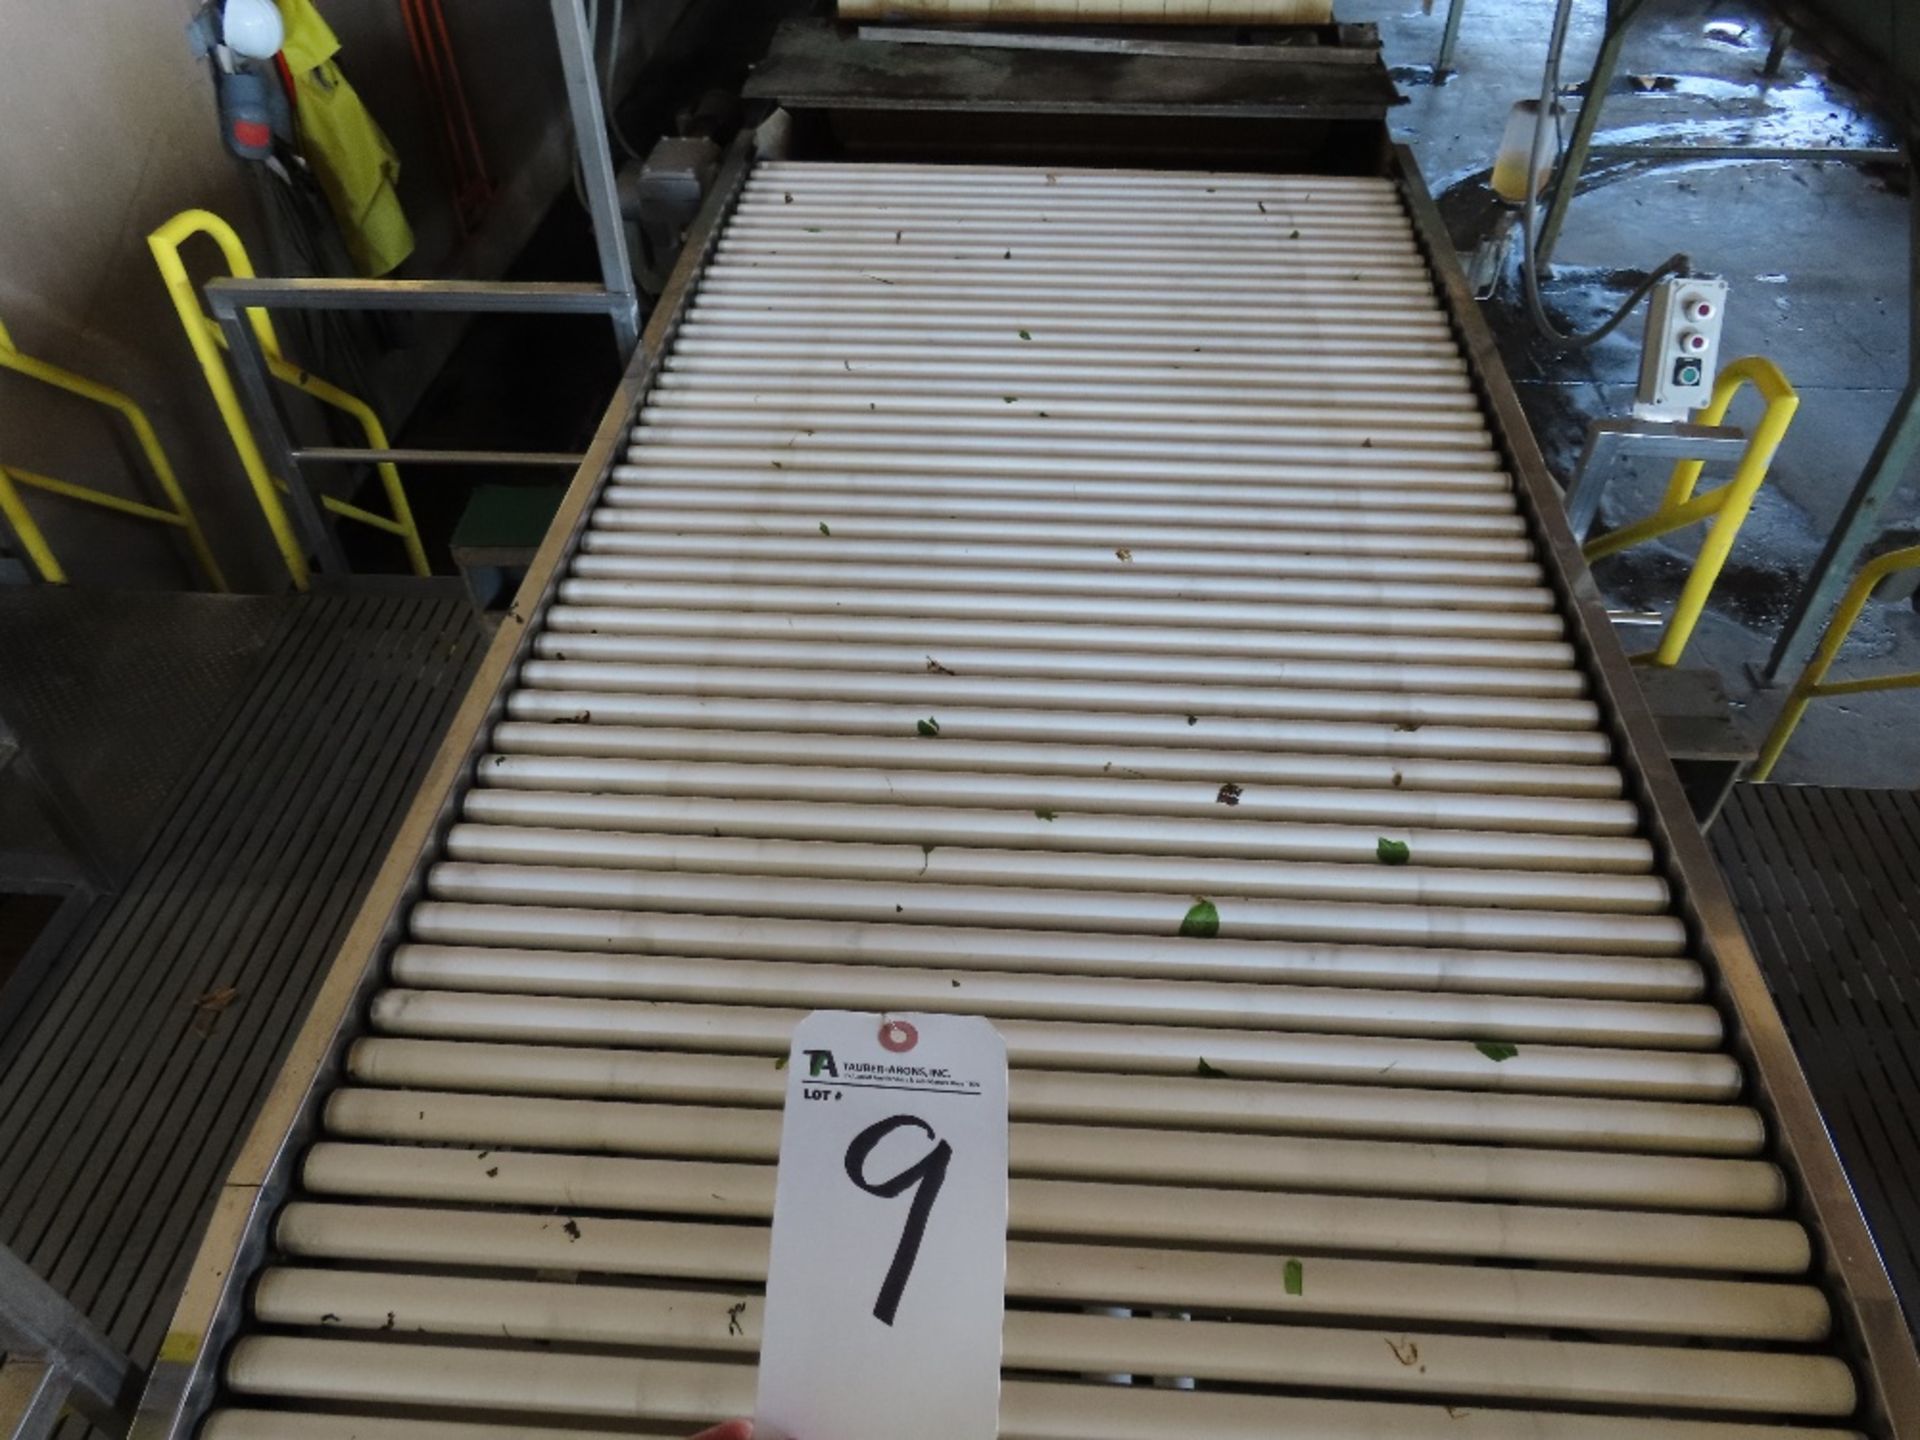 Approx. 6' x 18' S.S. Roller Conveyor (SUBJECT TO CONFIRMATION) - Image 2 of 4